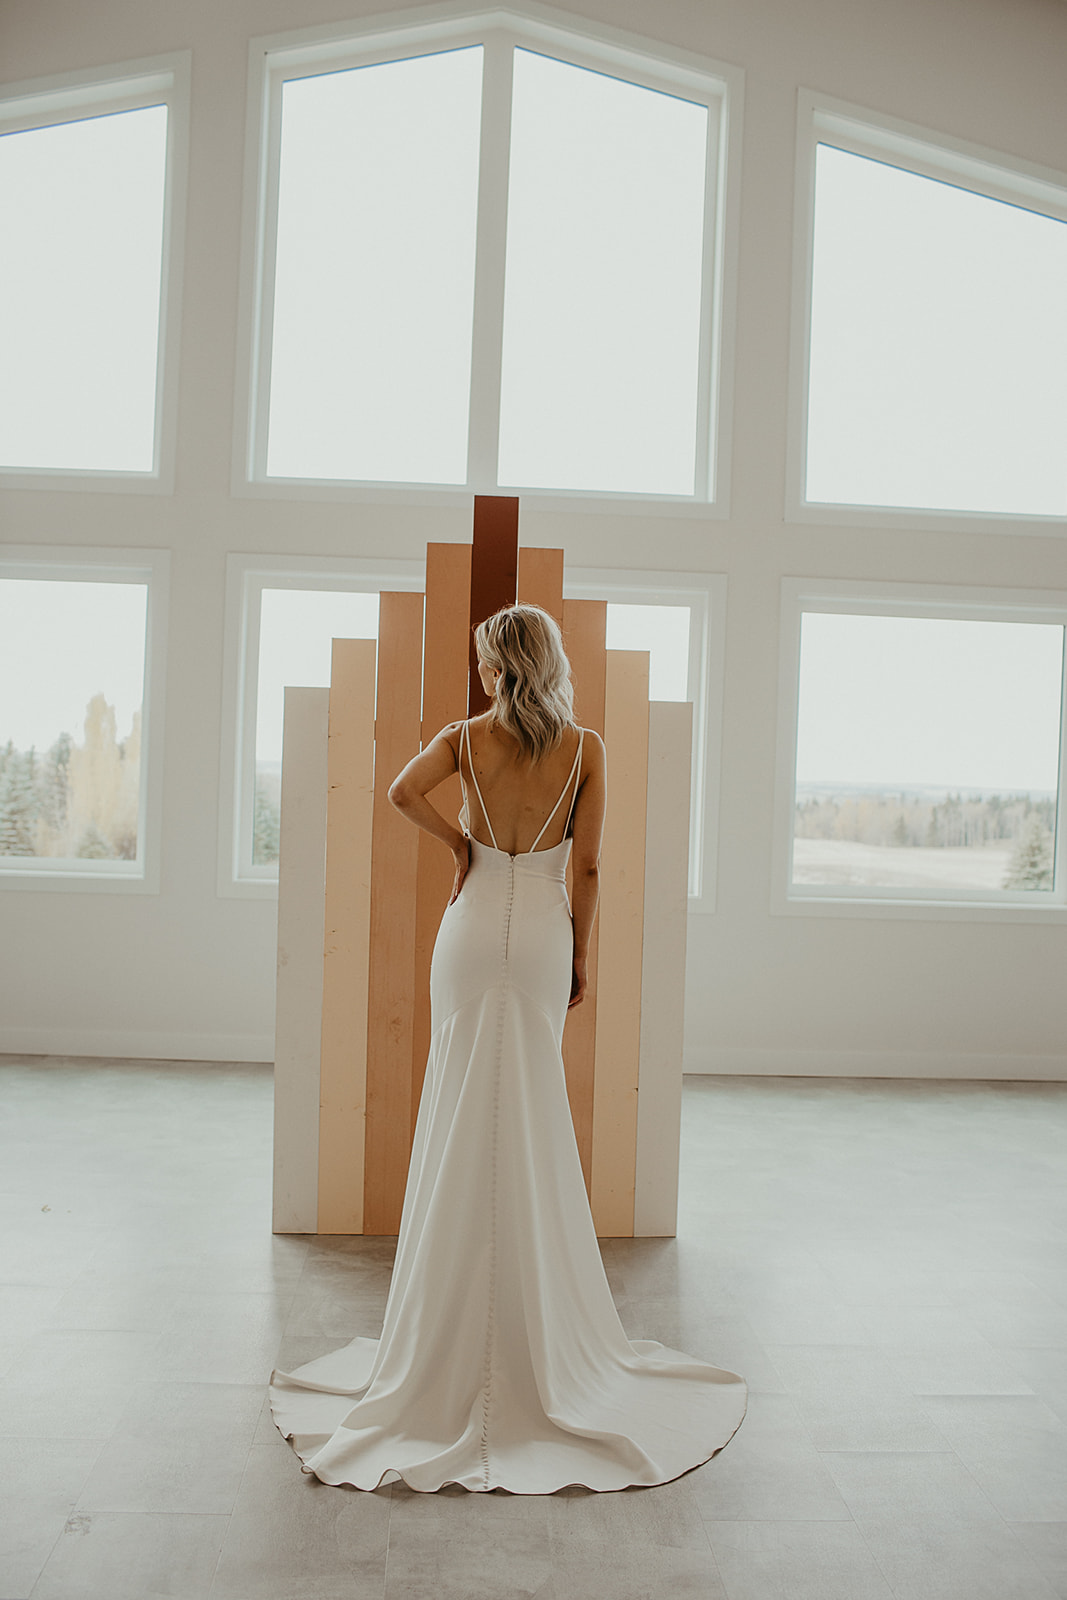 Floor-length crepe wedding gown, fitted silhouette wedding dress